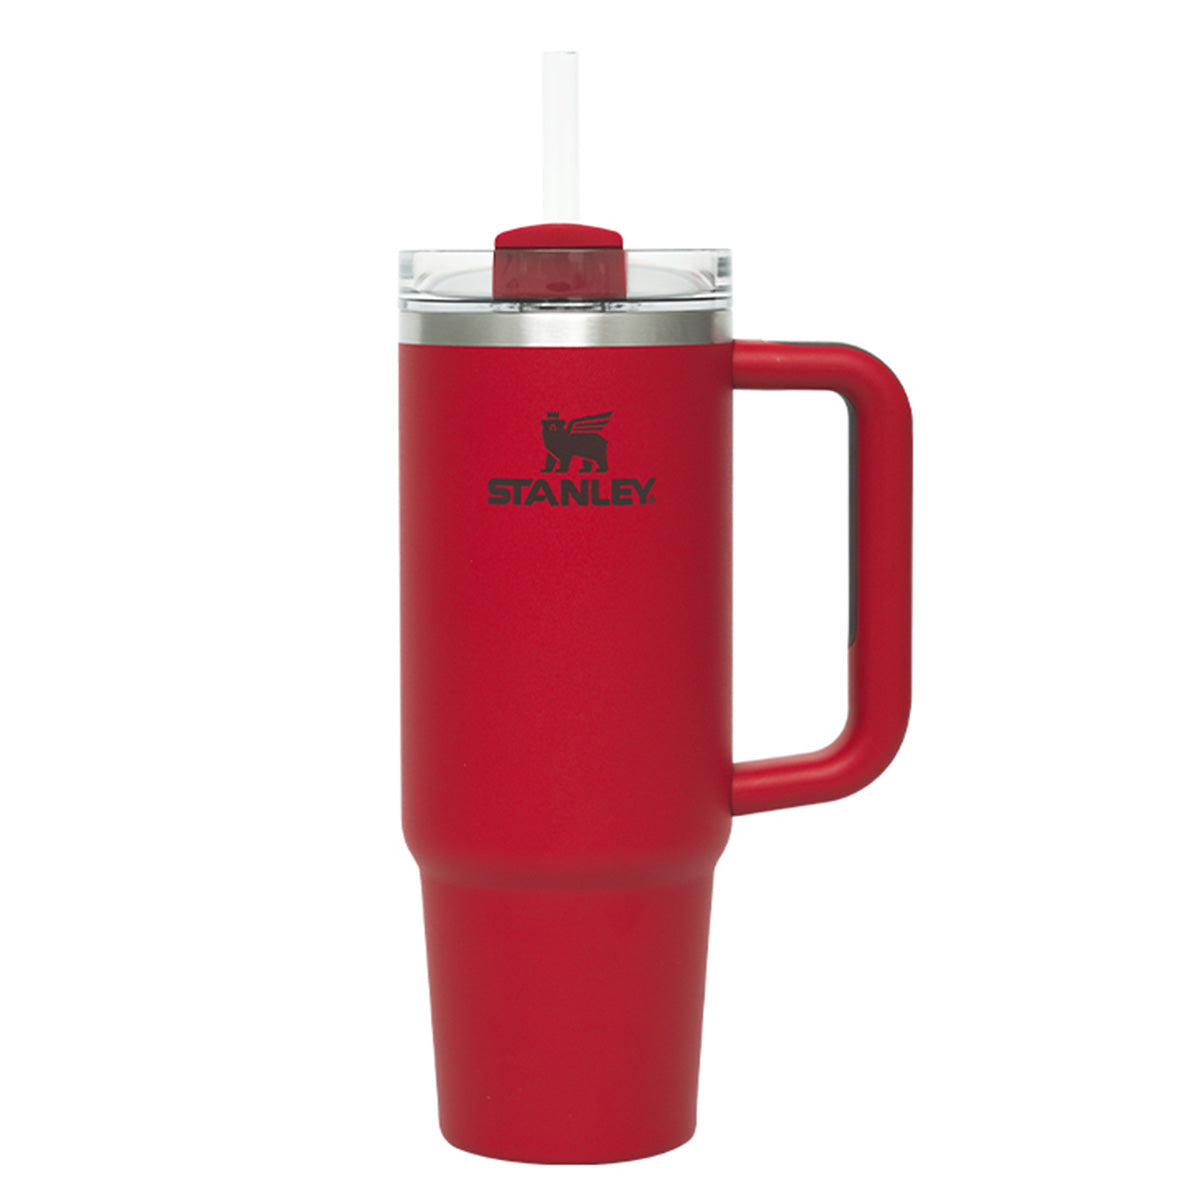 Stanley tumbler China Lava/celebration red Stainless steel straw cup 3